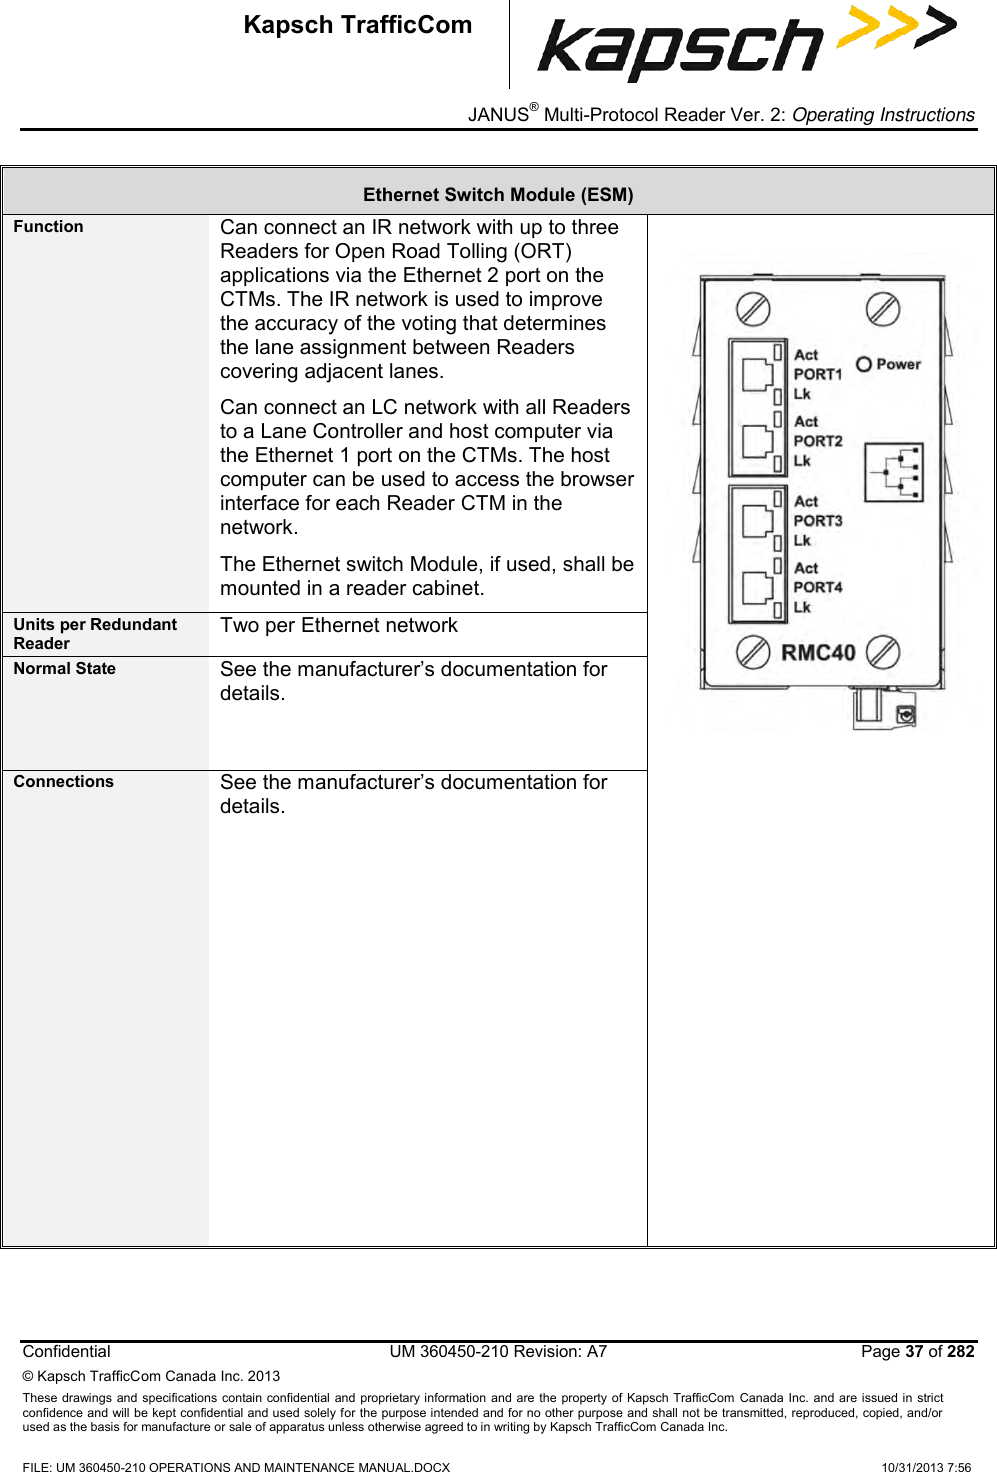 _ JANUS® Multi-Protocol Reader Ver. 2: Operating Instructions  Confidential  UM 360450-210 Revision: A7   Page 37 of 282 © Kapsch TrafficCom Canada Inc. 2013 These  drawings and specifications contain confidential  and  proprietary information and are  the  property of Kapsch TrafficCom  Canada Inc.  and are issued in strict confidence and will be kept confidential and used solely for the purpose intended and for no other purpose and shall not be transmitted, reproduced, copied, and/or used as the basis for manufacture or sale of apparatus unless otherwise agreed to in writing by Kapsch TrafficCom Canada Inc.  FILE: UM 360450-210 OPERATIONS AND MAINTENANCE MANUAL.DOCX    10/31/2013 7:56  Kapsch TrafficCom Ethernet Switch Module (ESM) Function Can connect an IR network with up to three Readers for Open Road Tolling (ORT) applications via the Ethernet 2 port on the CTMs. The IR network is used to improve the accuracy of the voting that determines the lane assignment between Readers covering adjacent lanes.  Can connect an LC network with all Readers to a Lane Controller and host computer via the Ethernet 1 port on the CTMs. The host computer can be used to access the browser interface for each Reader CTM in the network. The Ethernet switch Module, if used, shall be mounted in a reader cabinet.  Units per Redundant Reader Two per Ethernet network Normal State See the manufacturer’s documentation for details. Connections See the manufacturer’s documentation for details.   